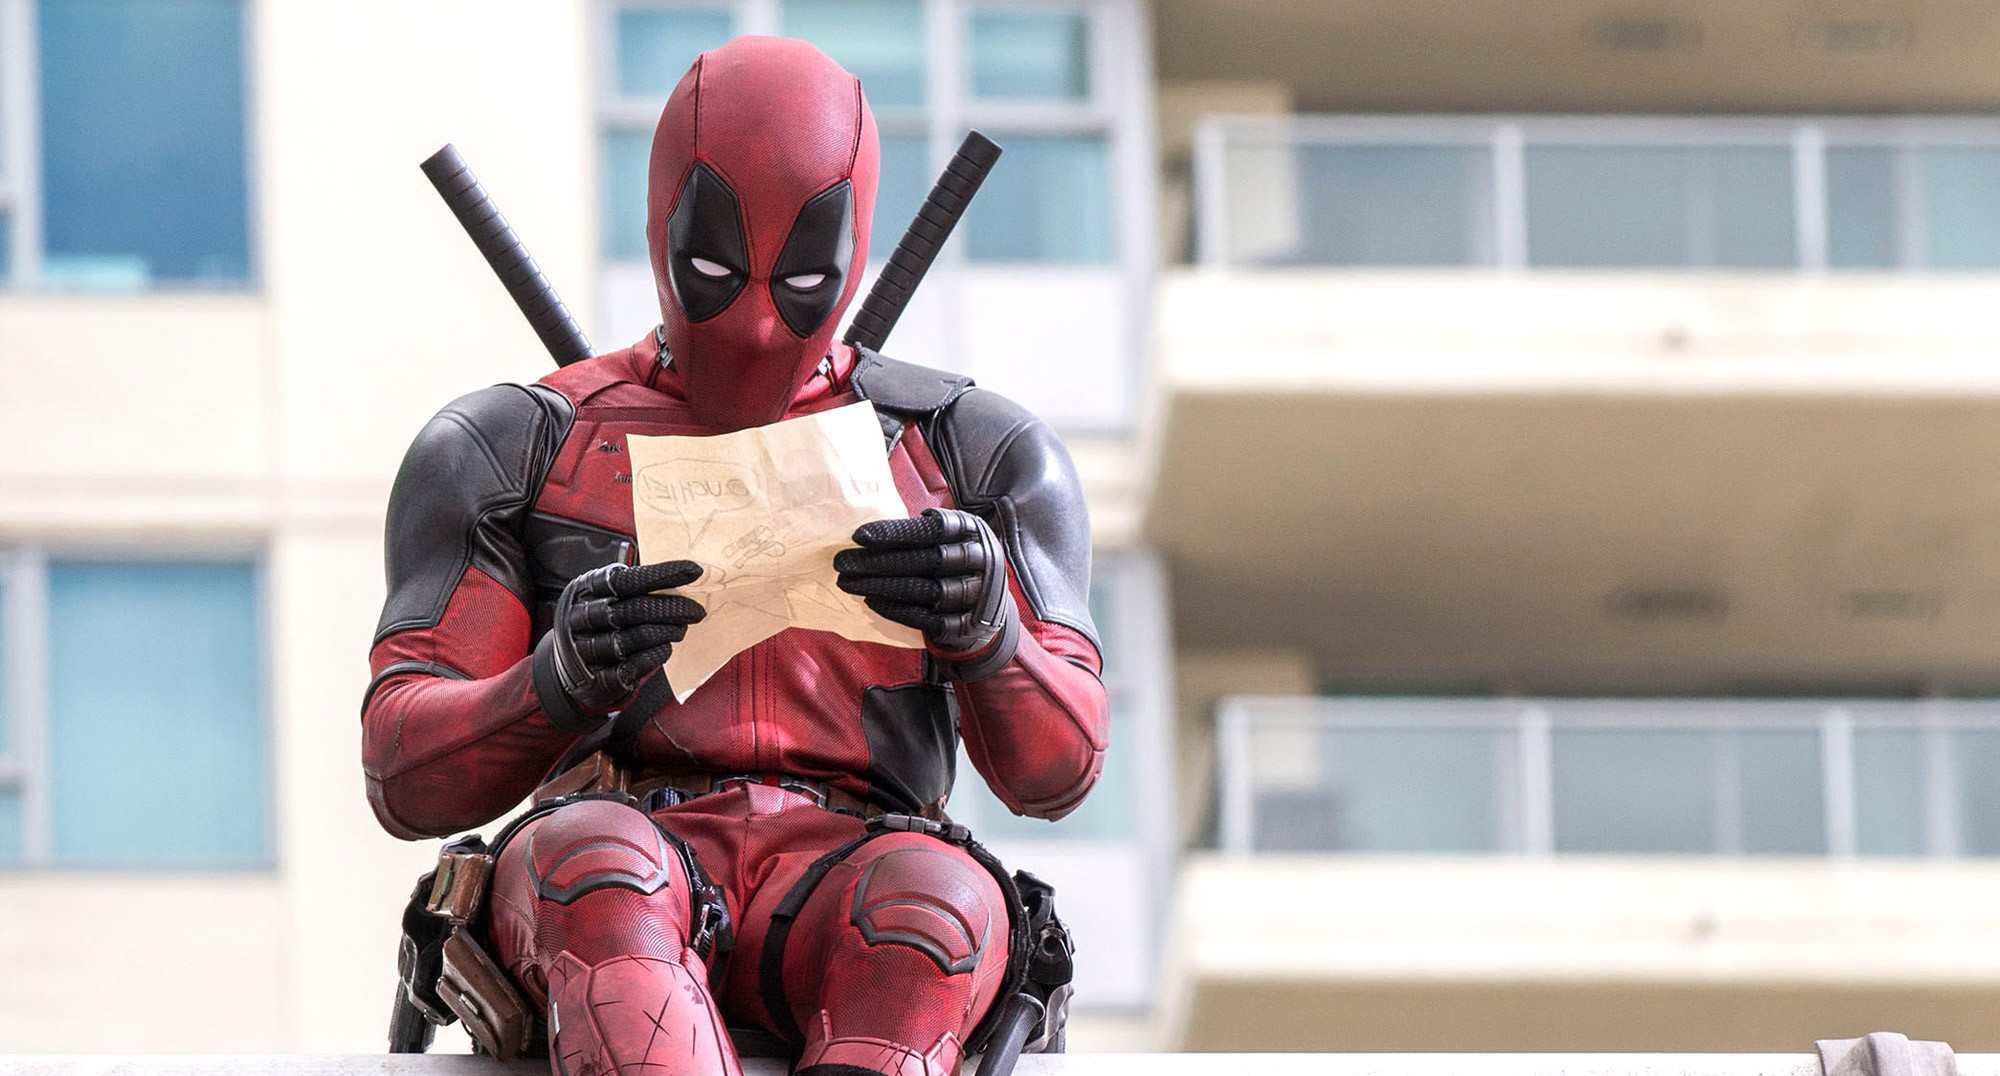 What We Liked (And Didn’t Like) About The Deadpool Movie